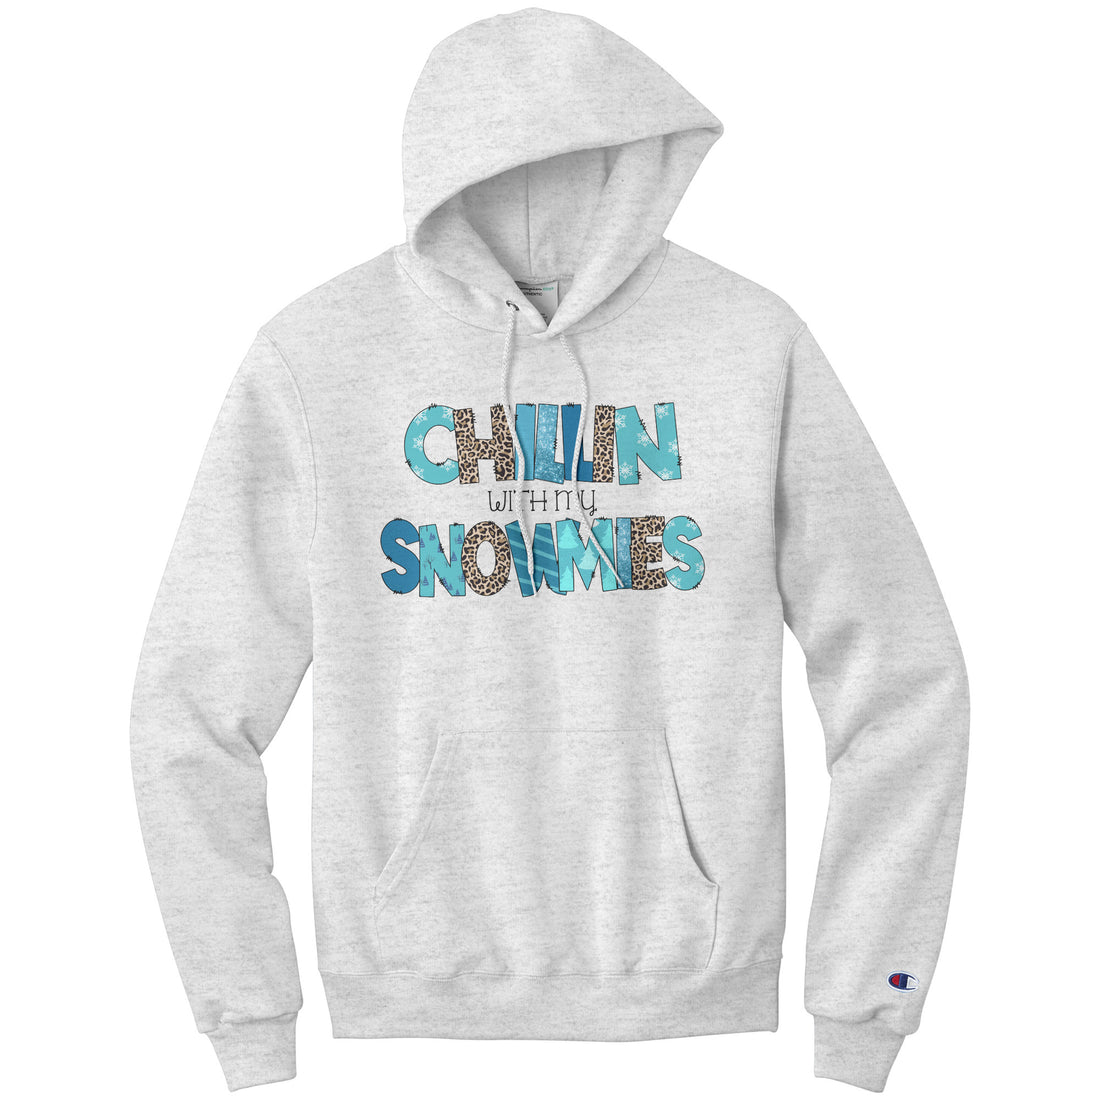 Chilling with snowies Home-clothes-jewelry